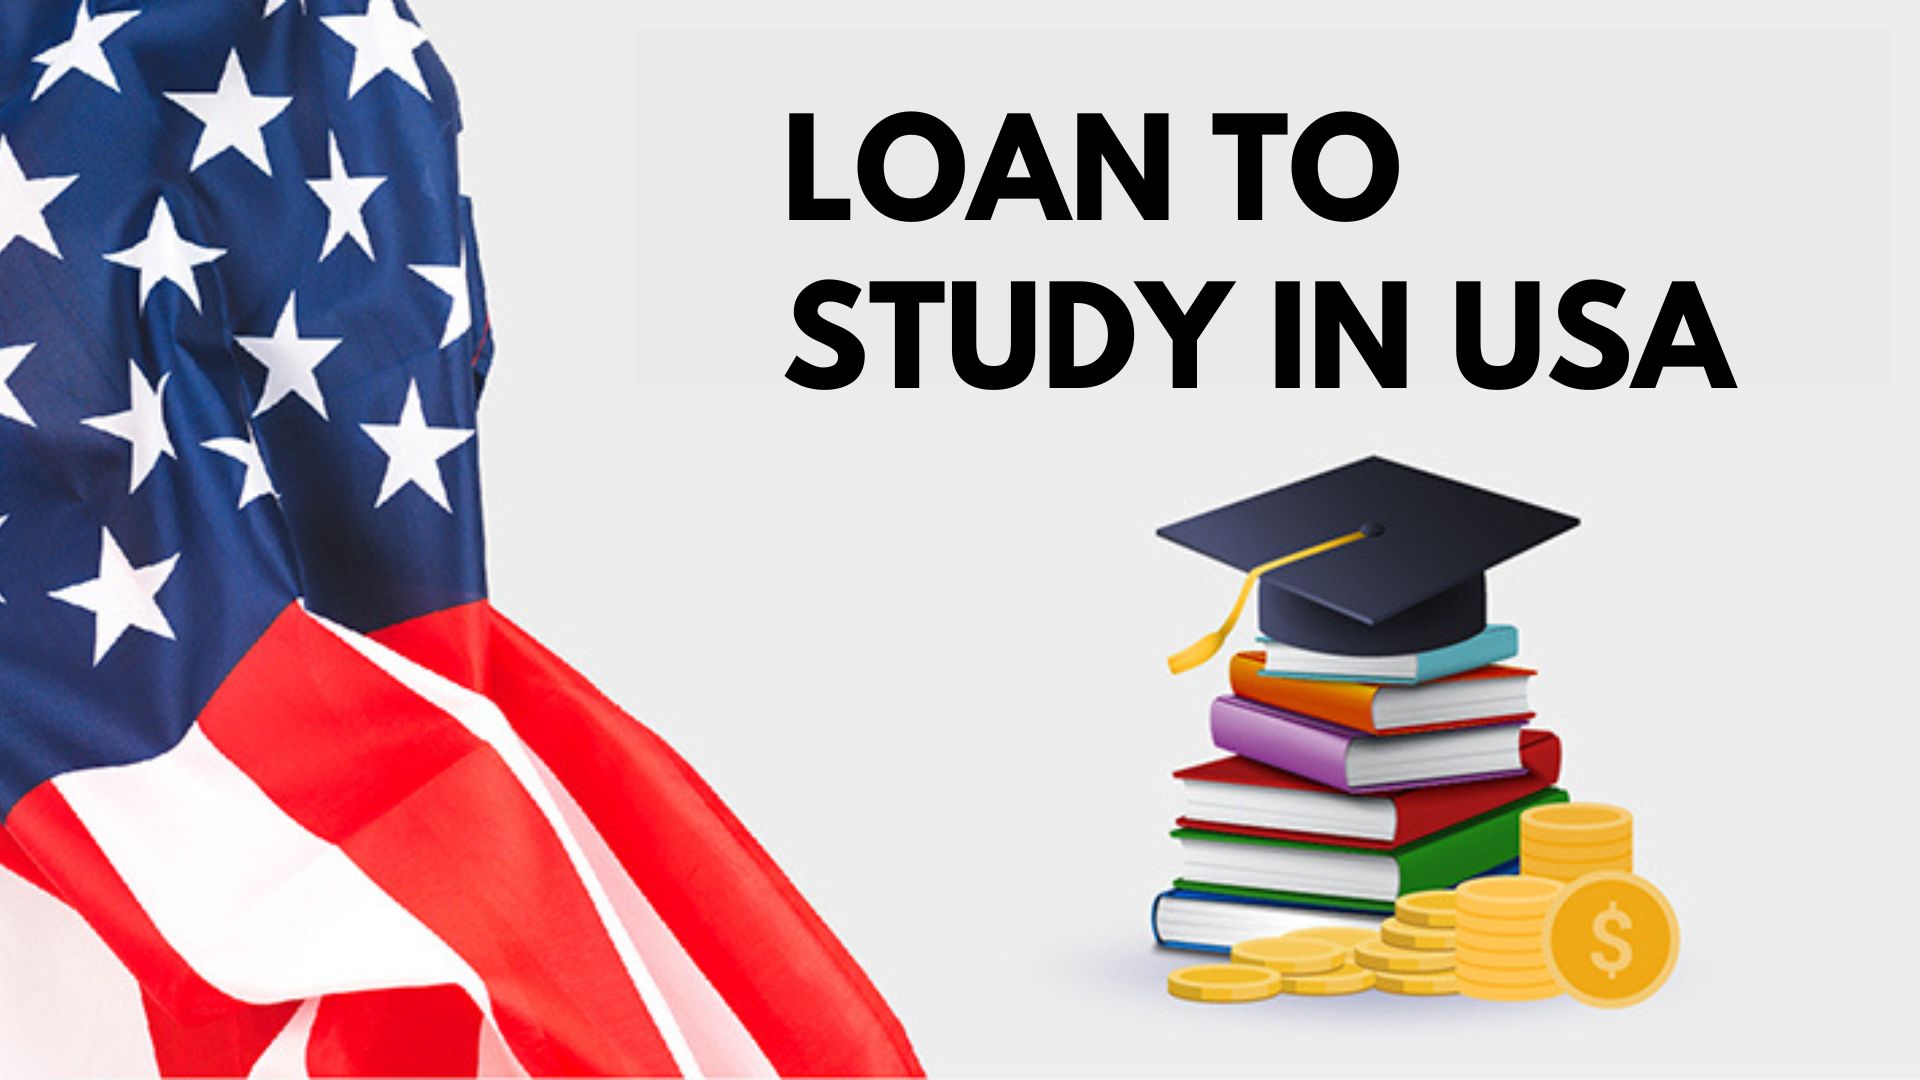 Education Loan to study in USA